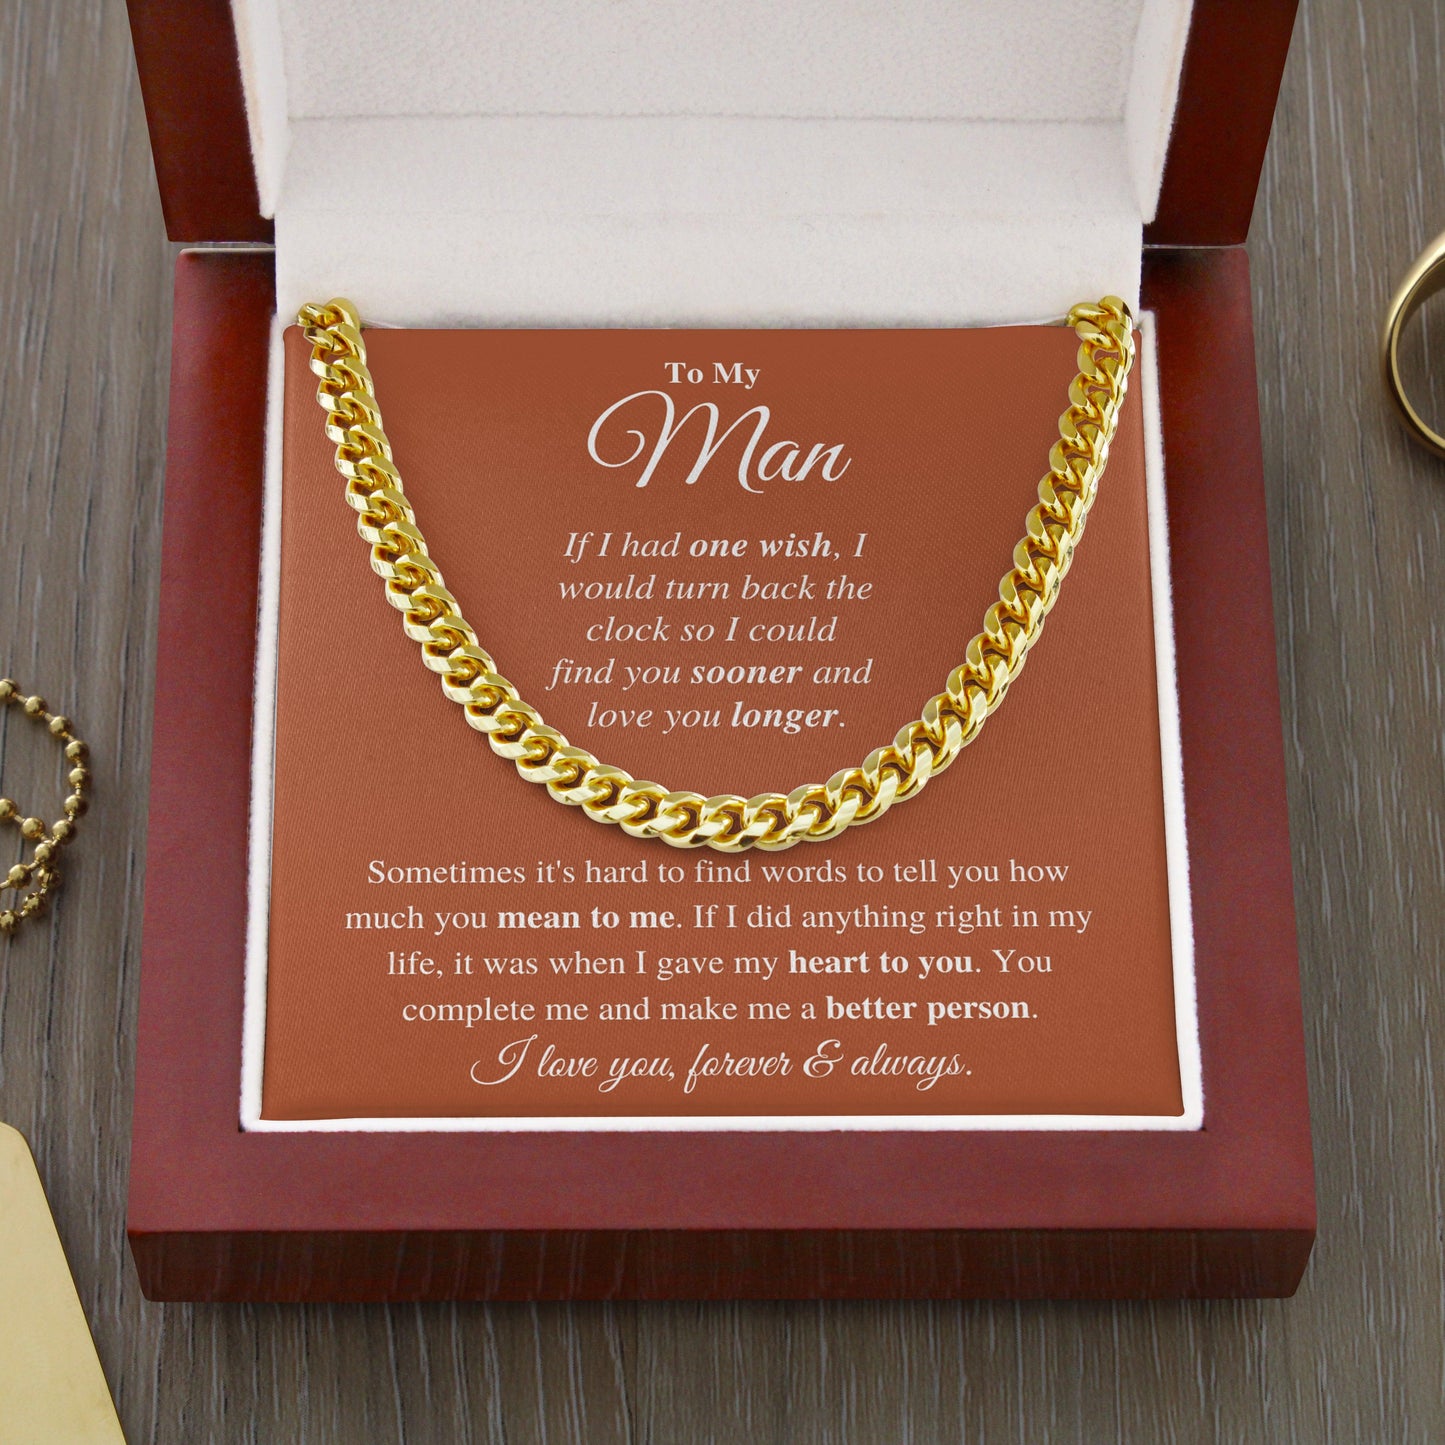 Jewelry gifts My Man - My Heart - Cuban Link Chain - Belesmé - Memorable Jewelry Gifts 